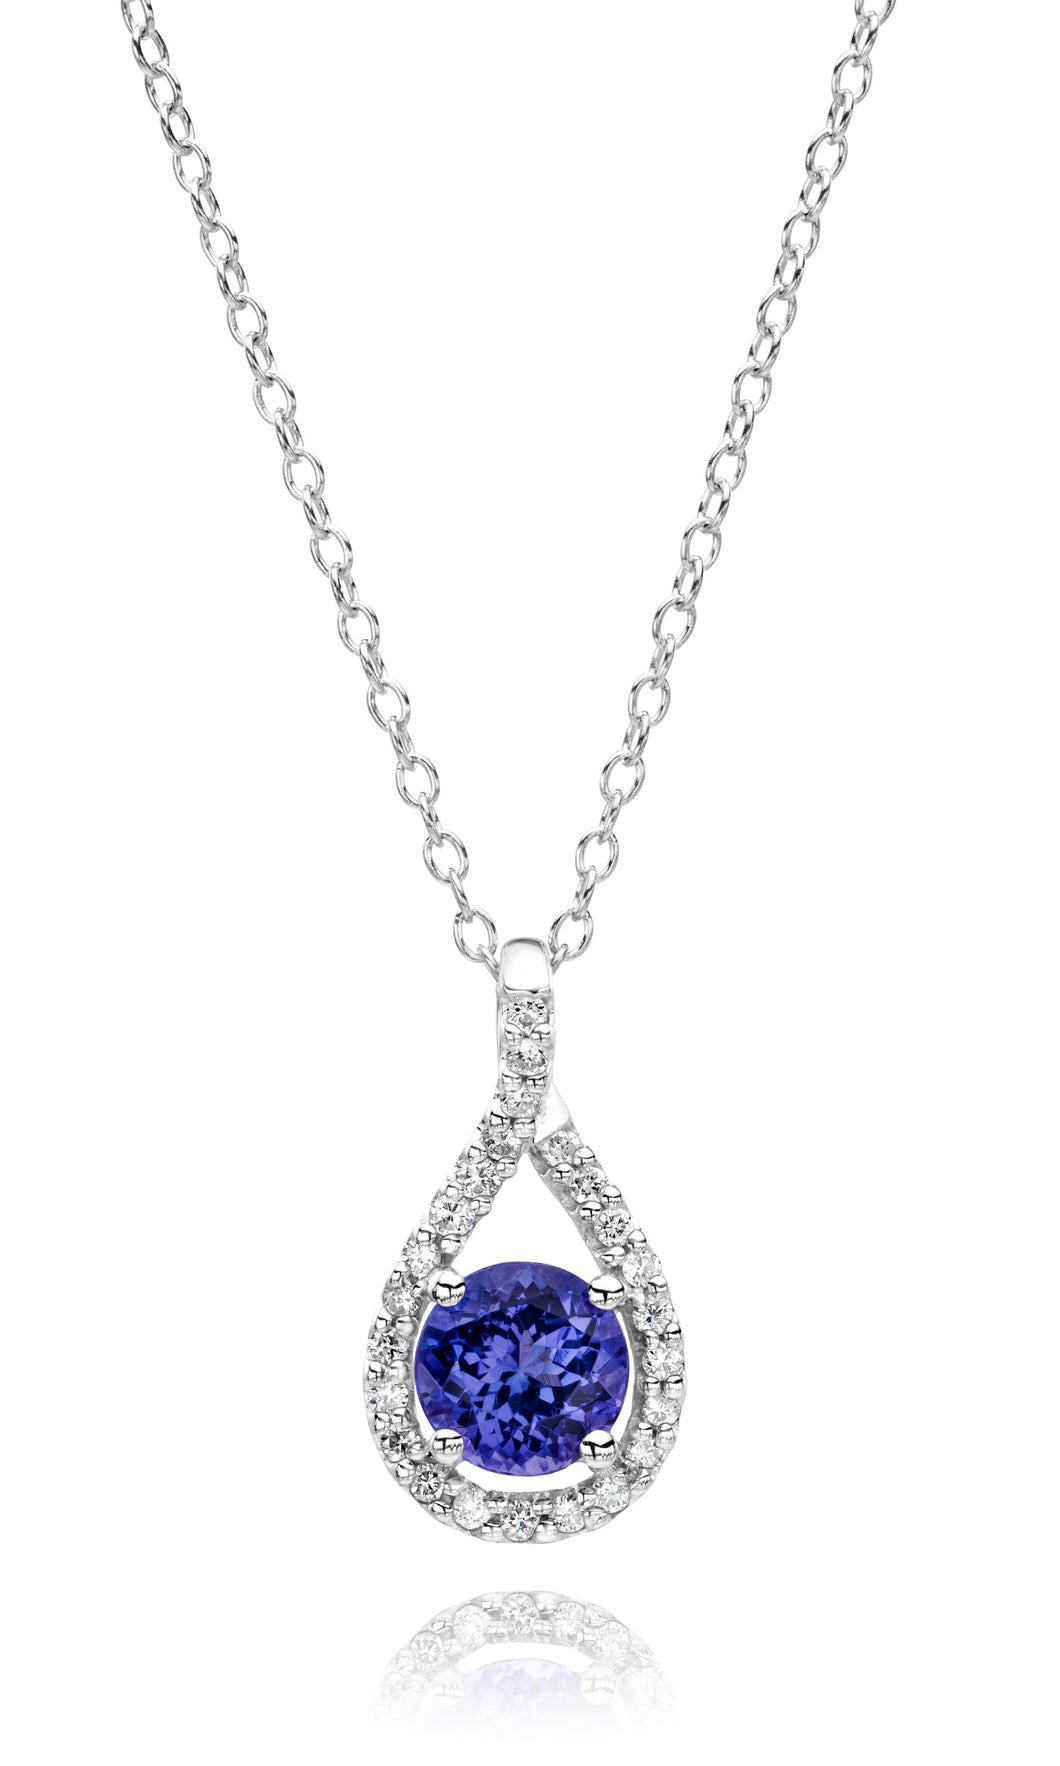 Diamond Pendant with Round Shaped Tanzanite set in 14k White Gold (chain sold separately)